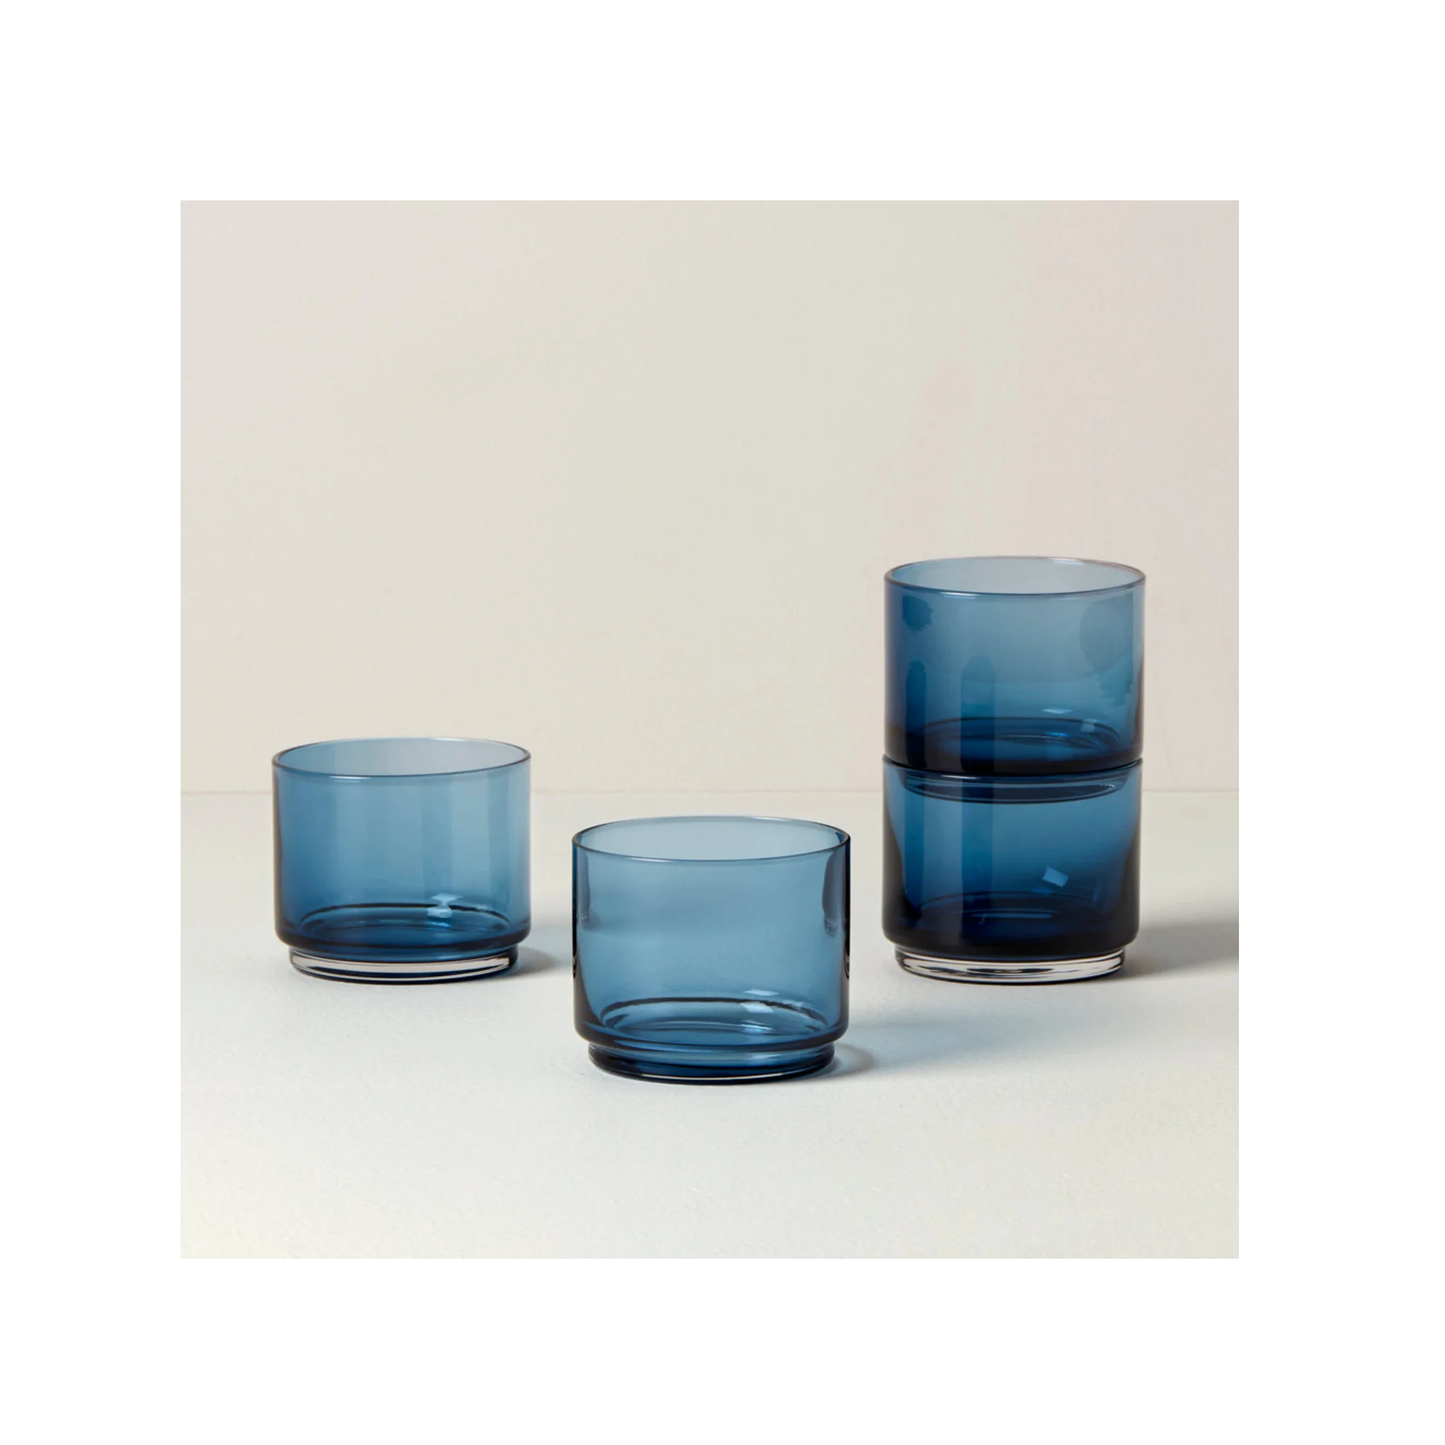 Tuscany Blue Classics Stackable 4-Piece Short Glasses By Lenox